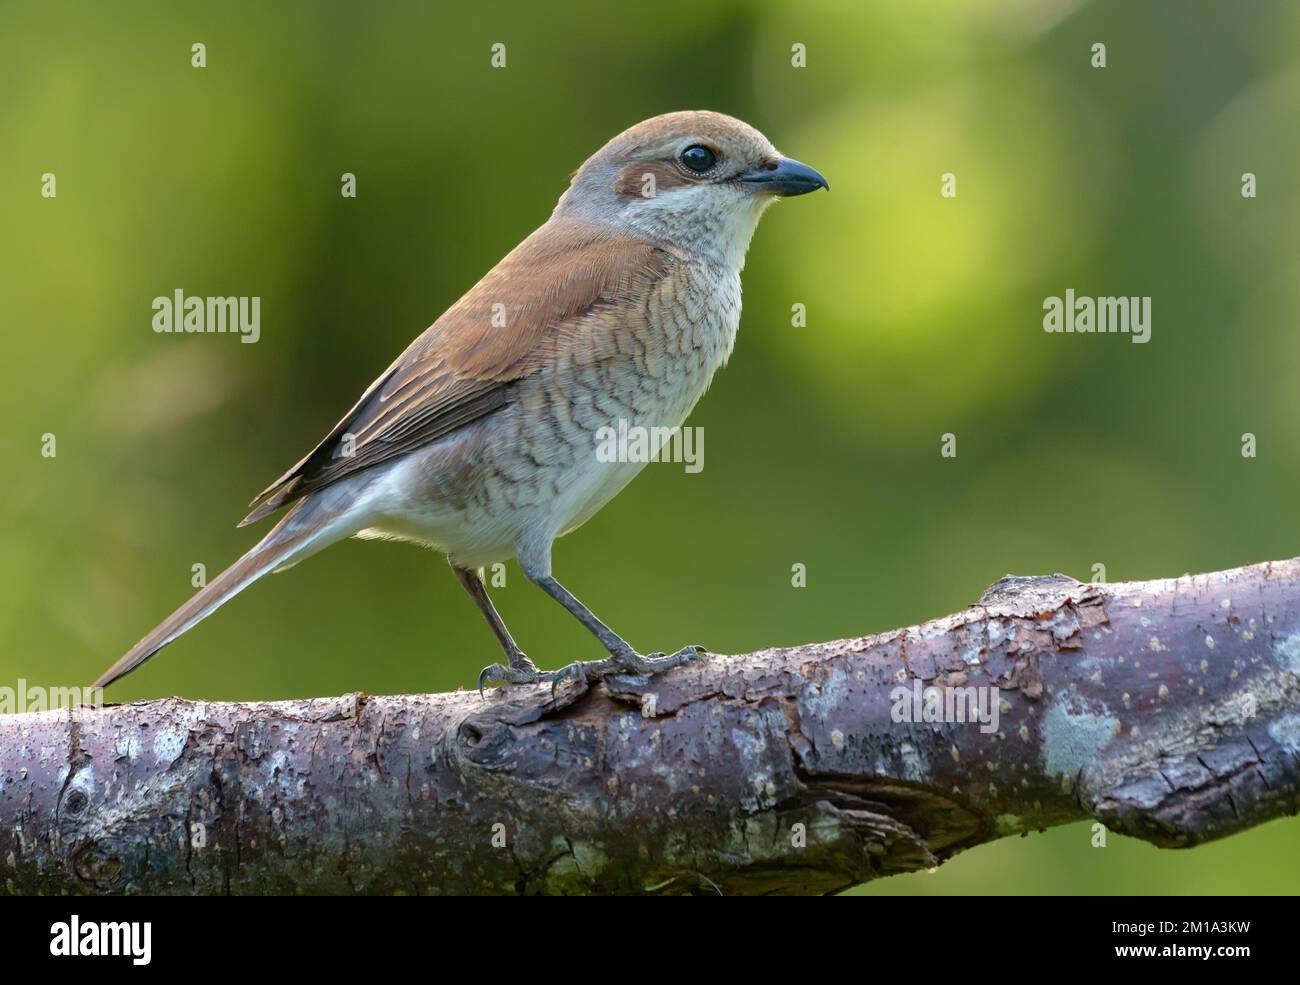 Female Red-backed Shrike (lanius collurio) perched on densely lichen covered branch in soft light Stock Photo